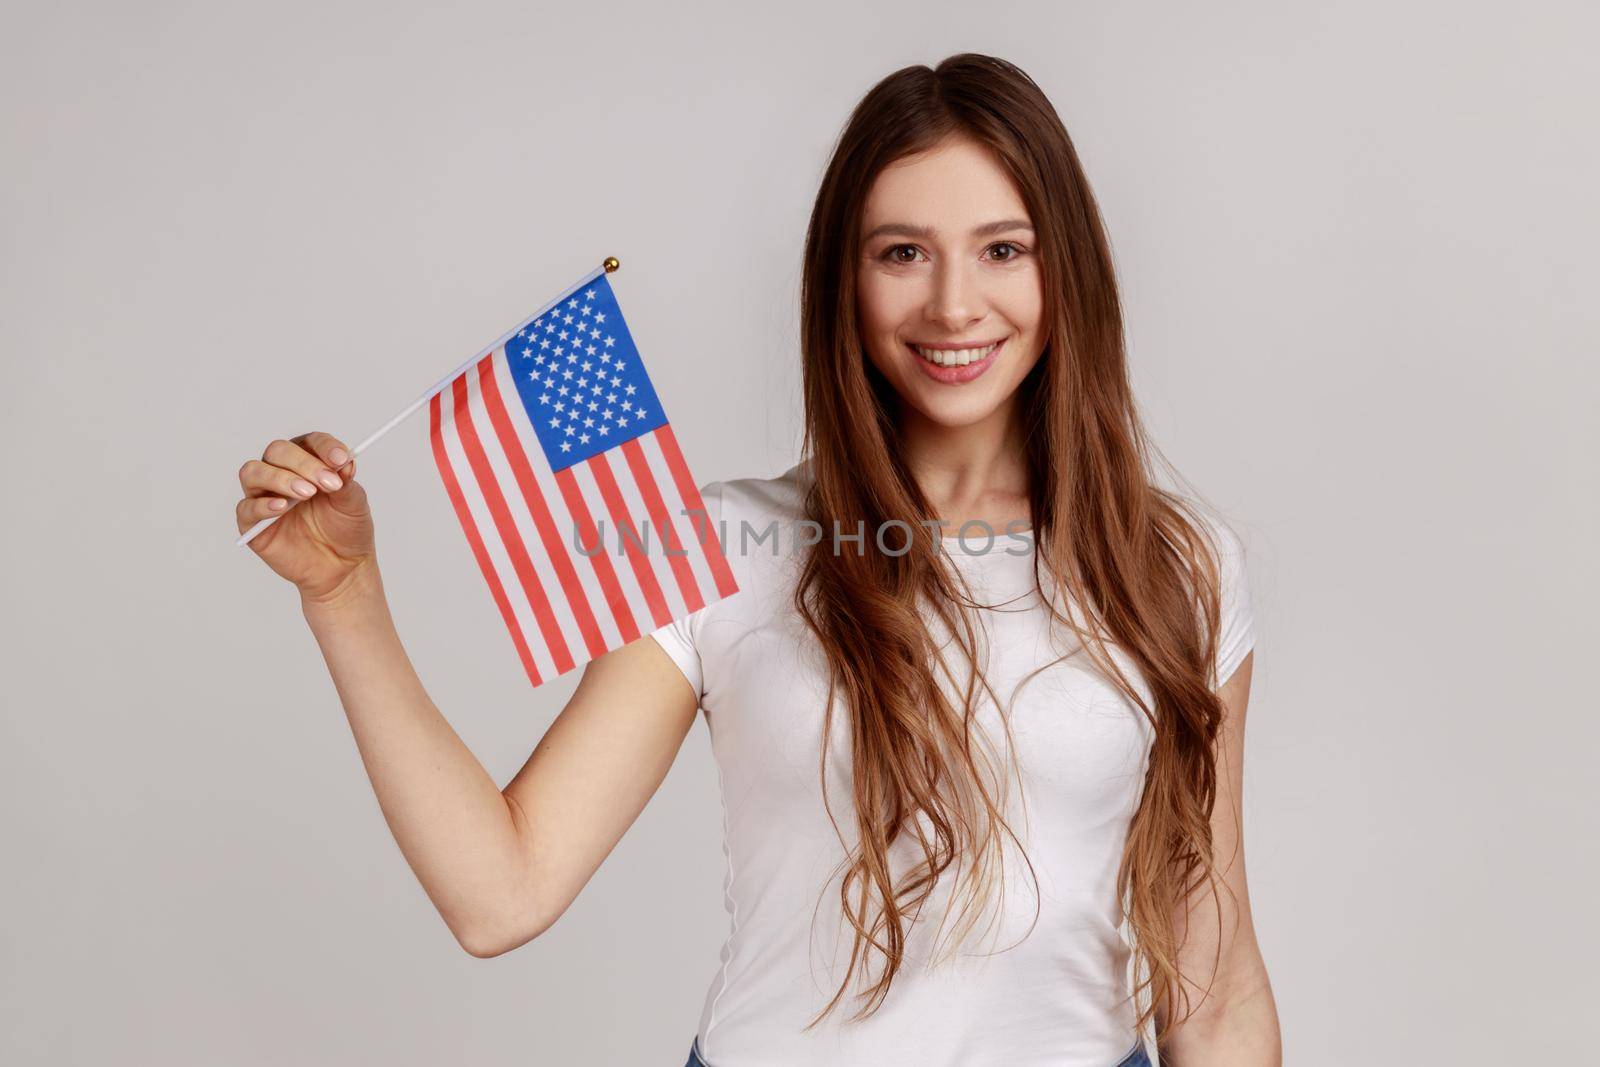 Young adult woman holding USA national flag, celebrating national Independence Day - 4th july. by Khosro1